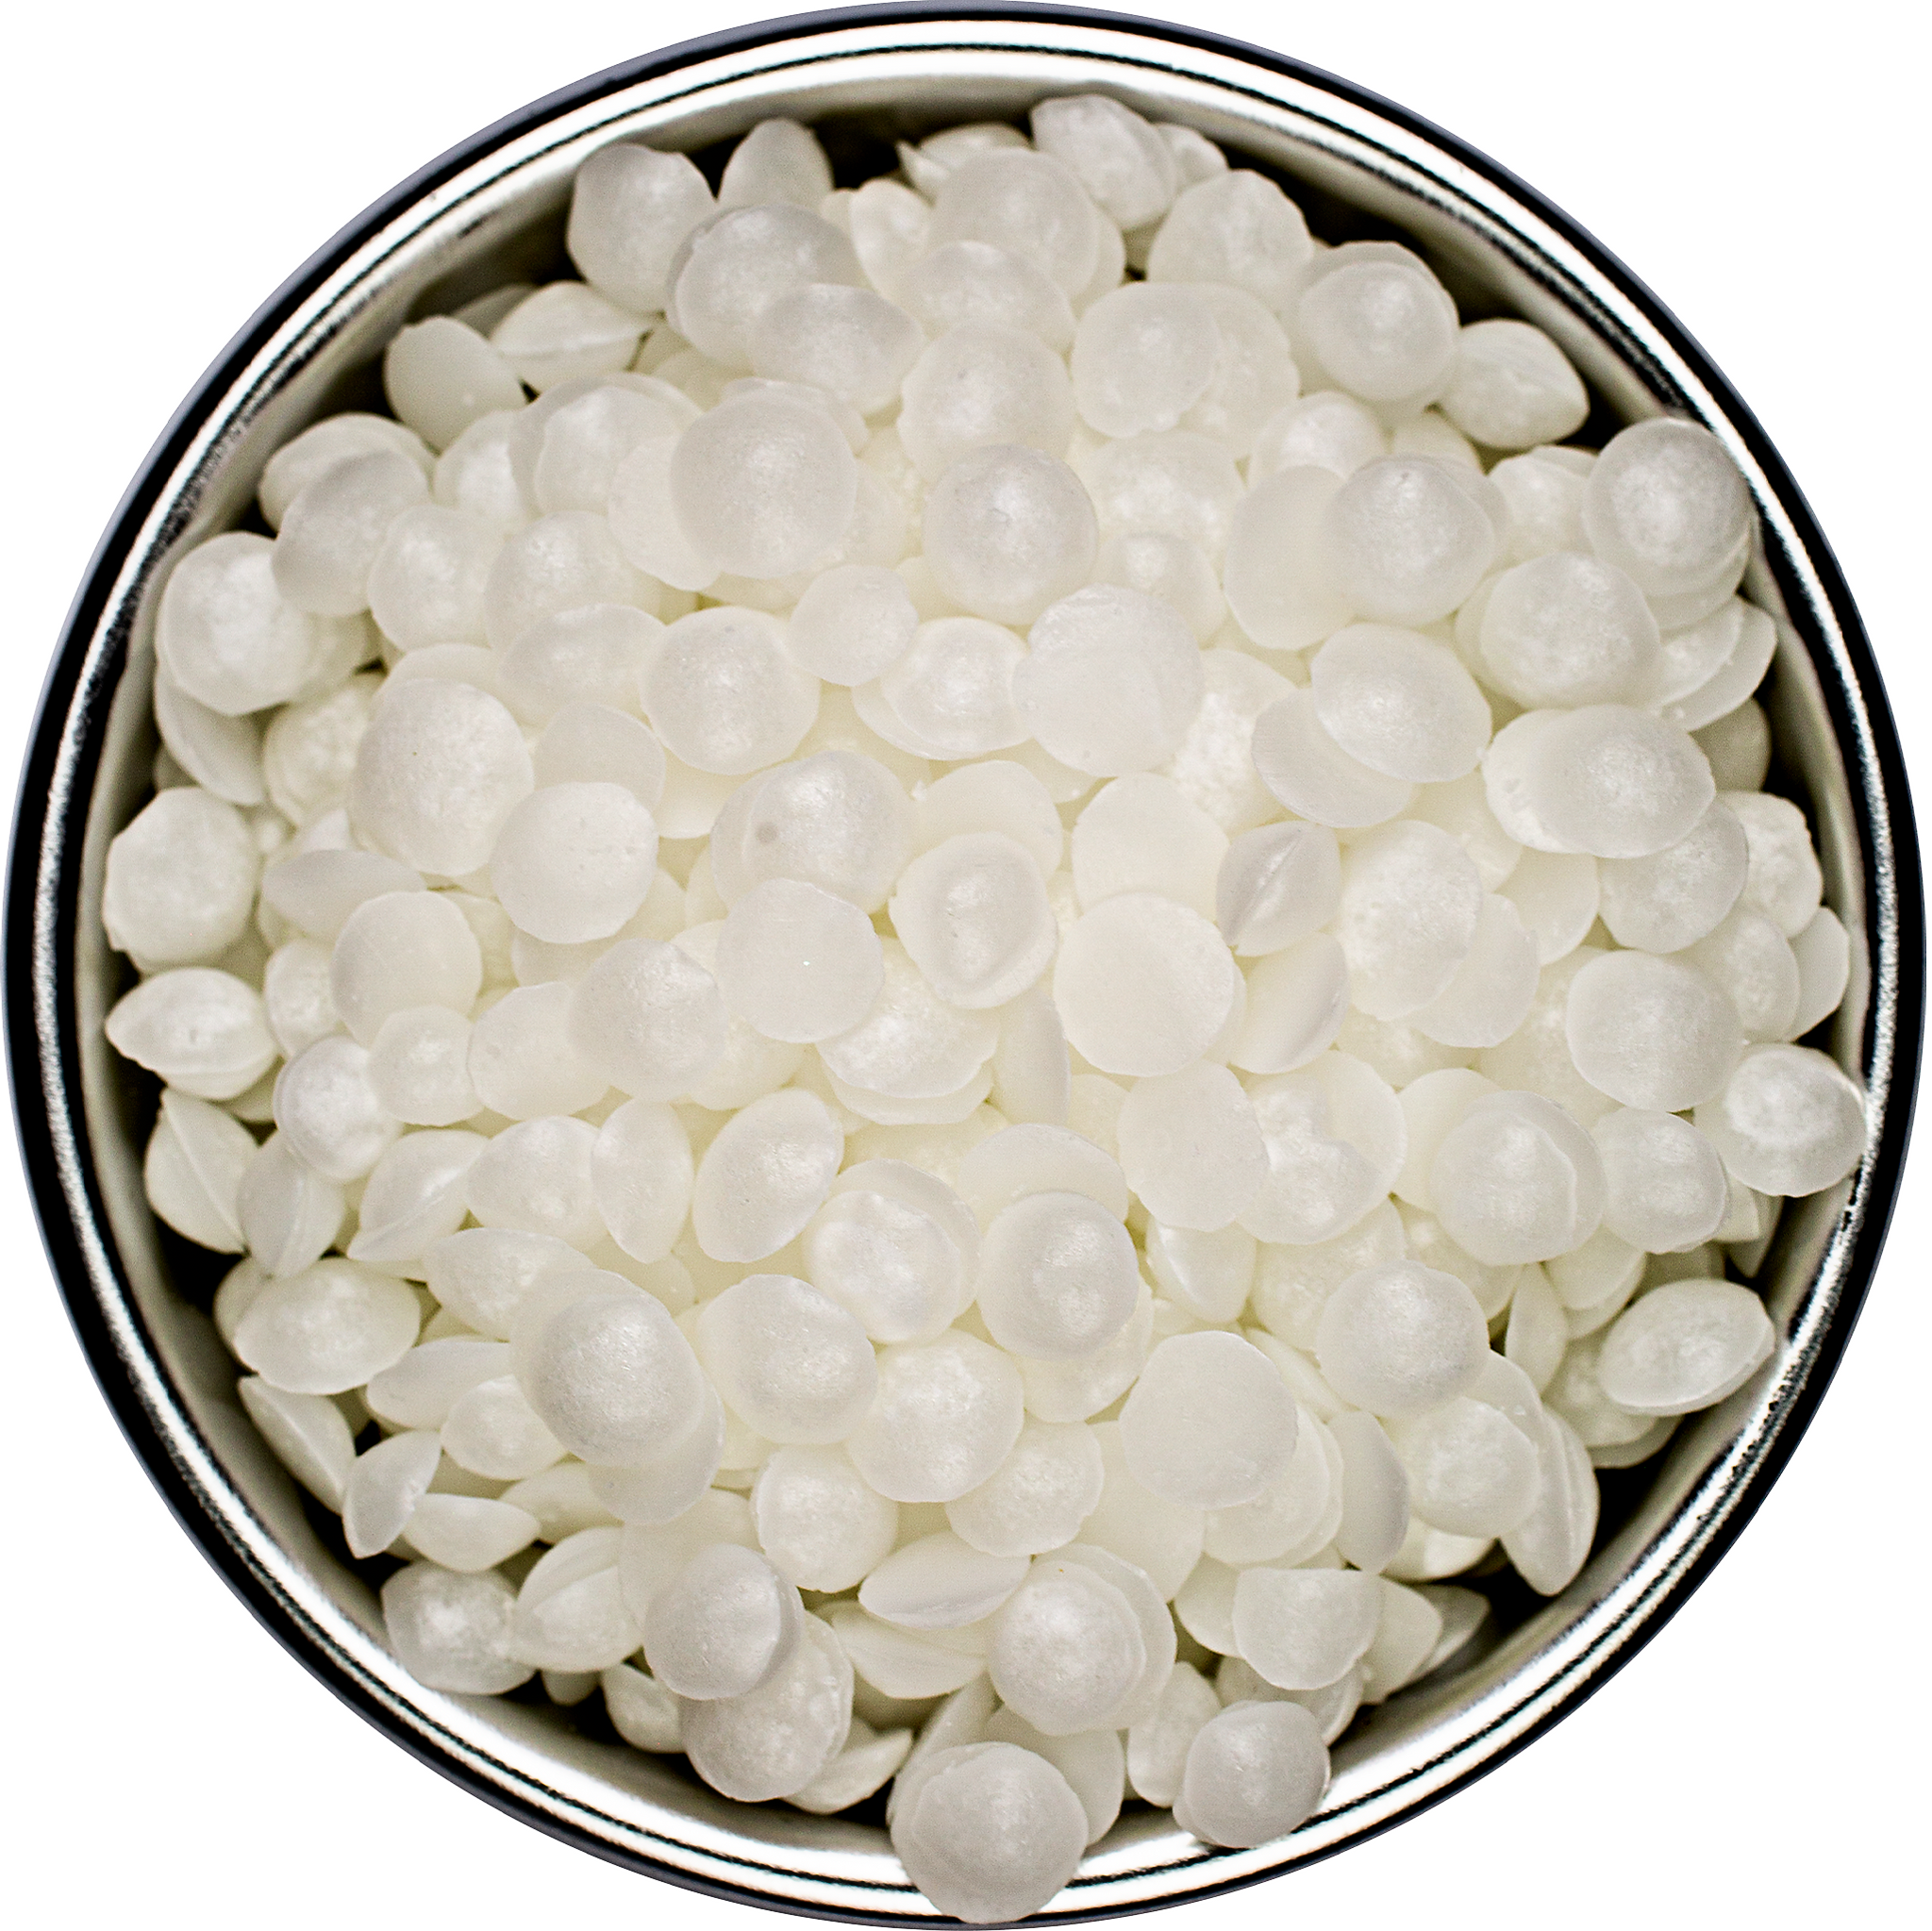 Natural Oils, Butters, Clays, Wholesale Soaps on Instagram: Emulsifying  Wax NF is a non-ionic self-emulsifying wax that is commonly used in  cosmetics and personal care products. NF stands for National Formulary,  which